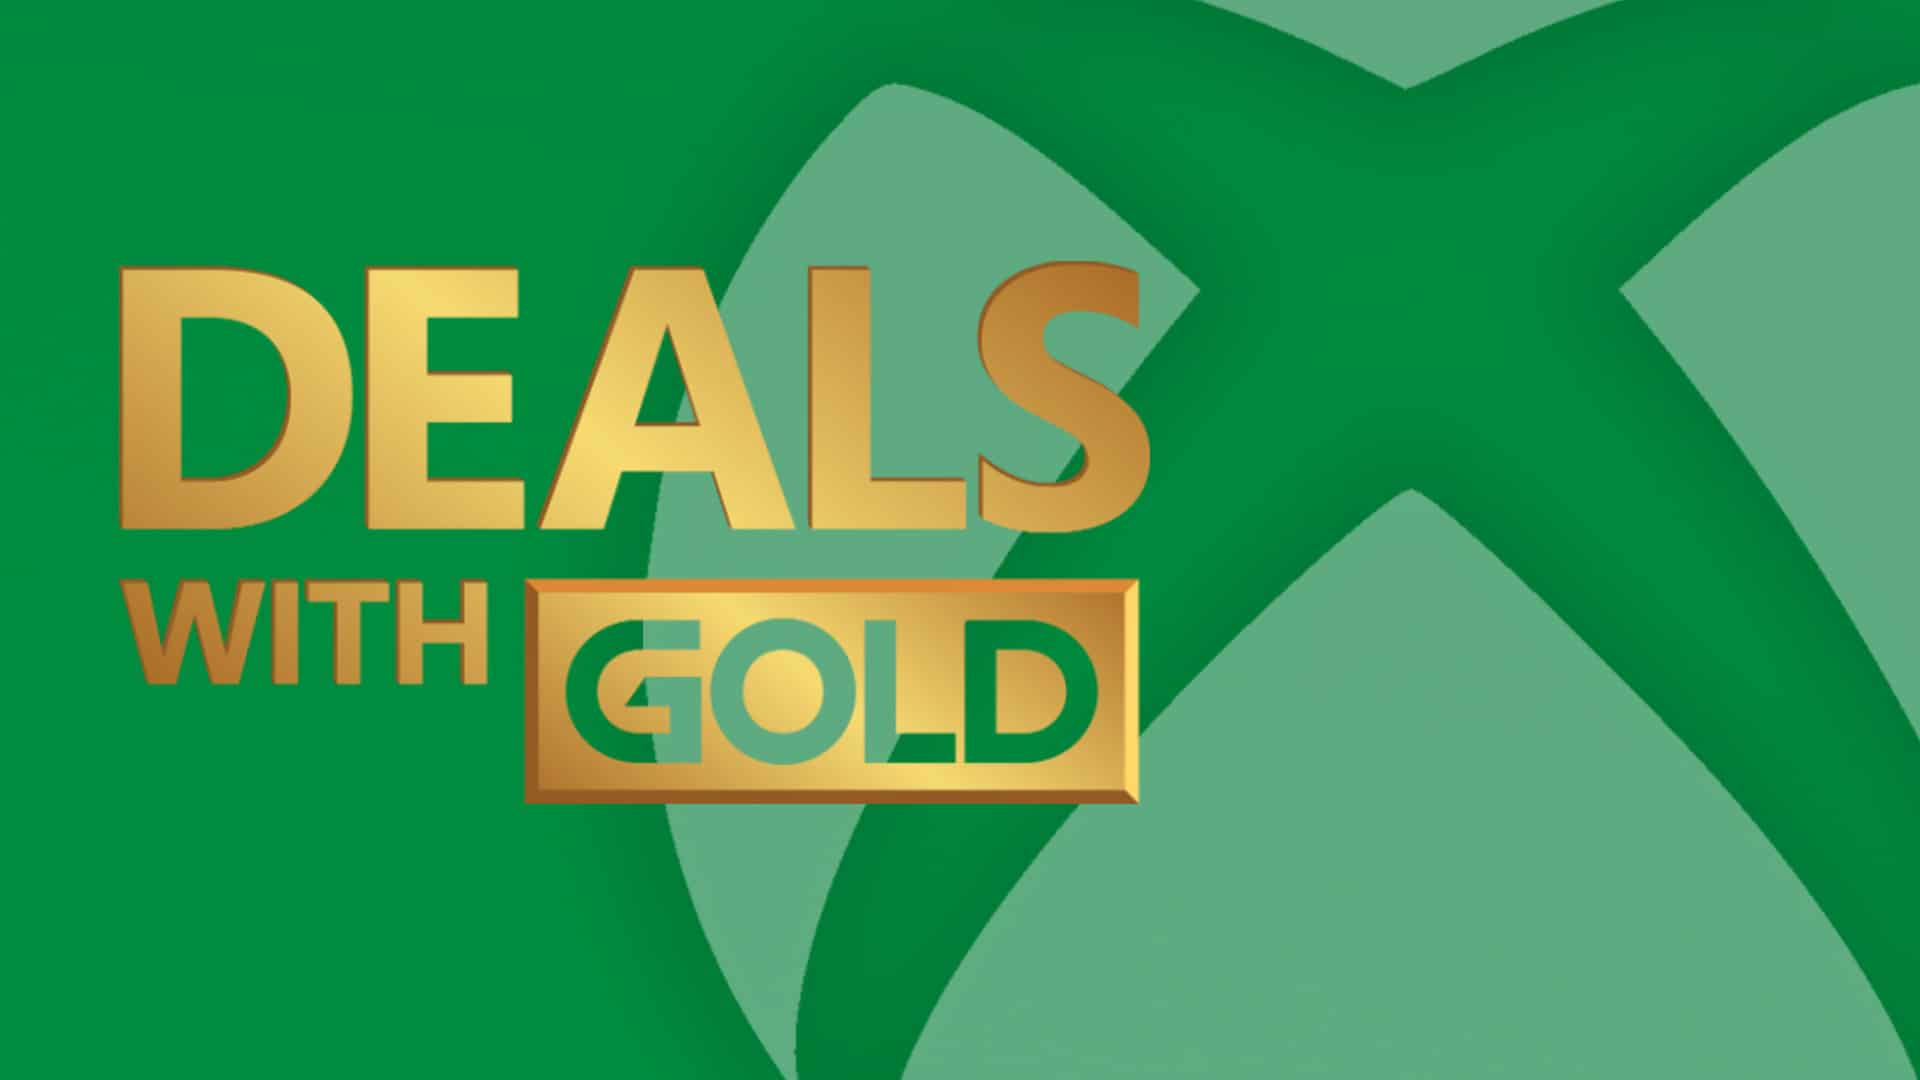 Xbox Live Deals With Gold, Darksiders,THQ Nordic, Xbox, Xbox 360, Xbox One, GamersRD